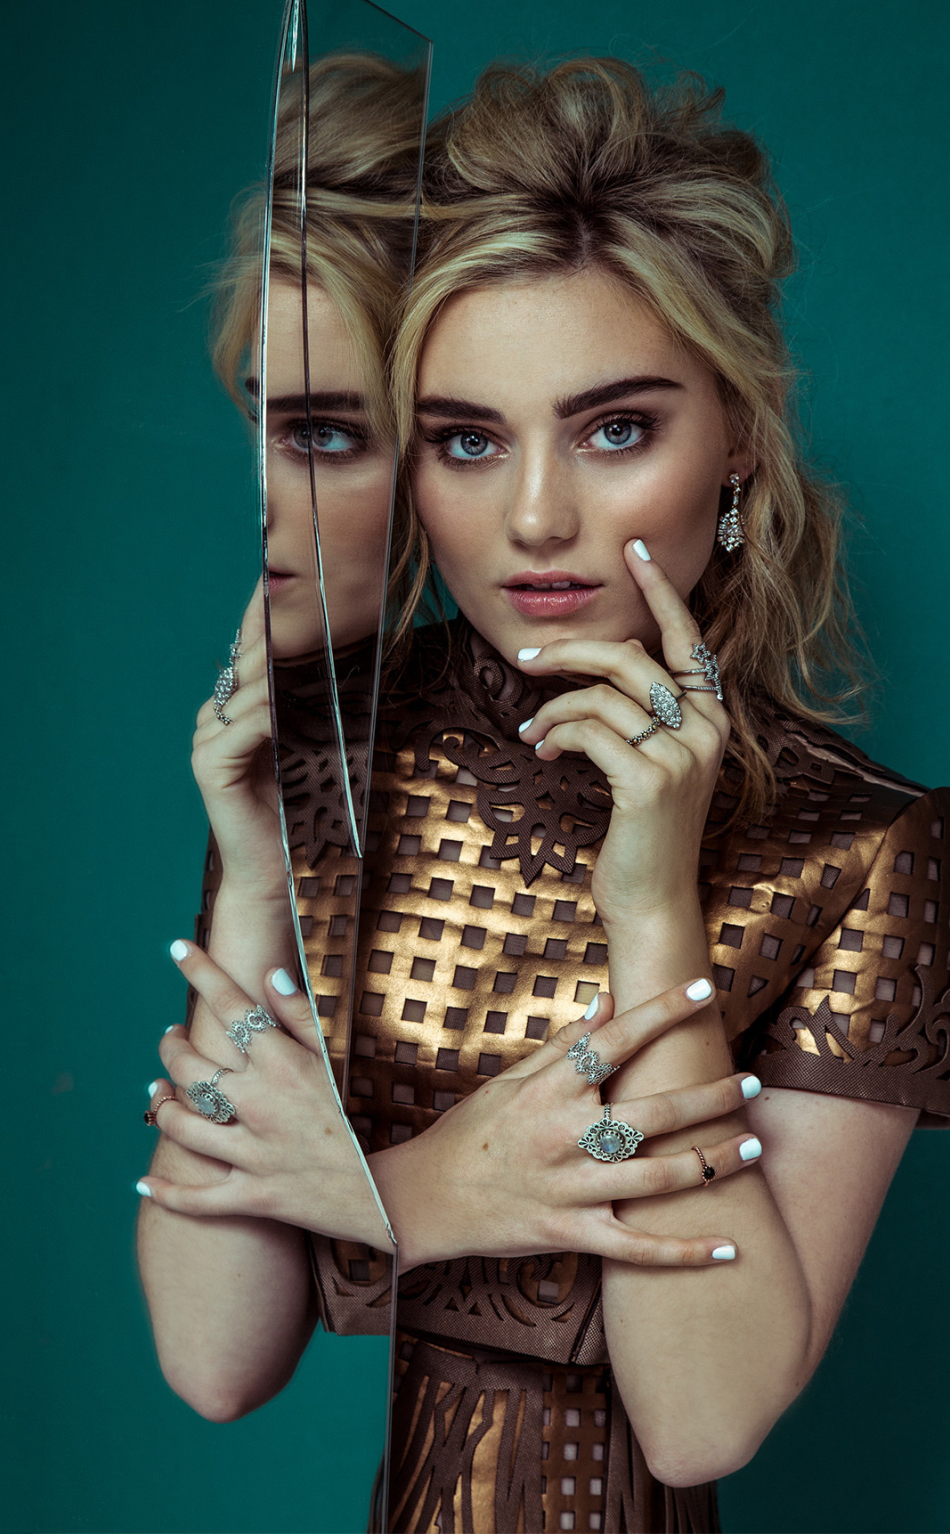 meg donnelly wallpapers wallpaper cave on meg donnelly wallpapers